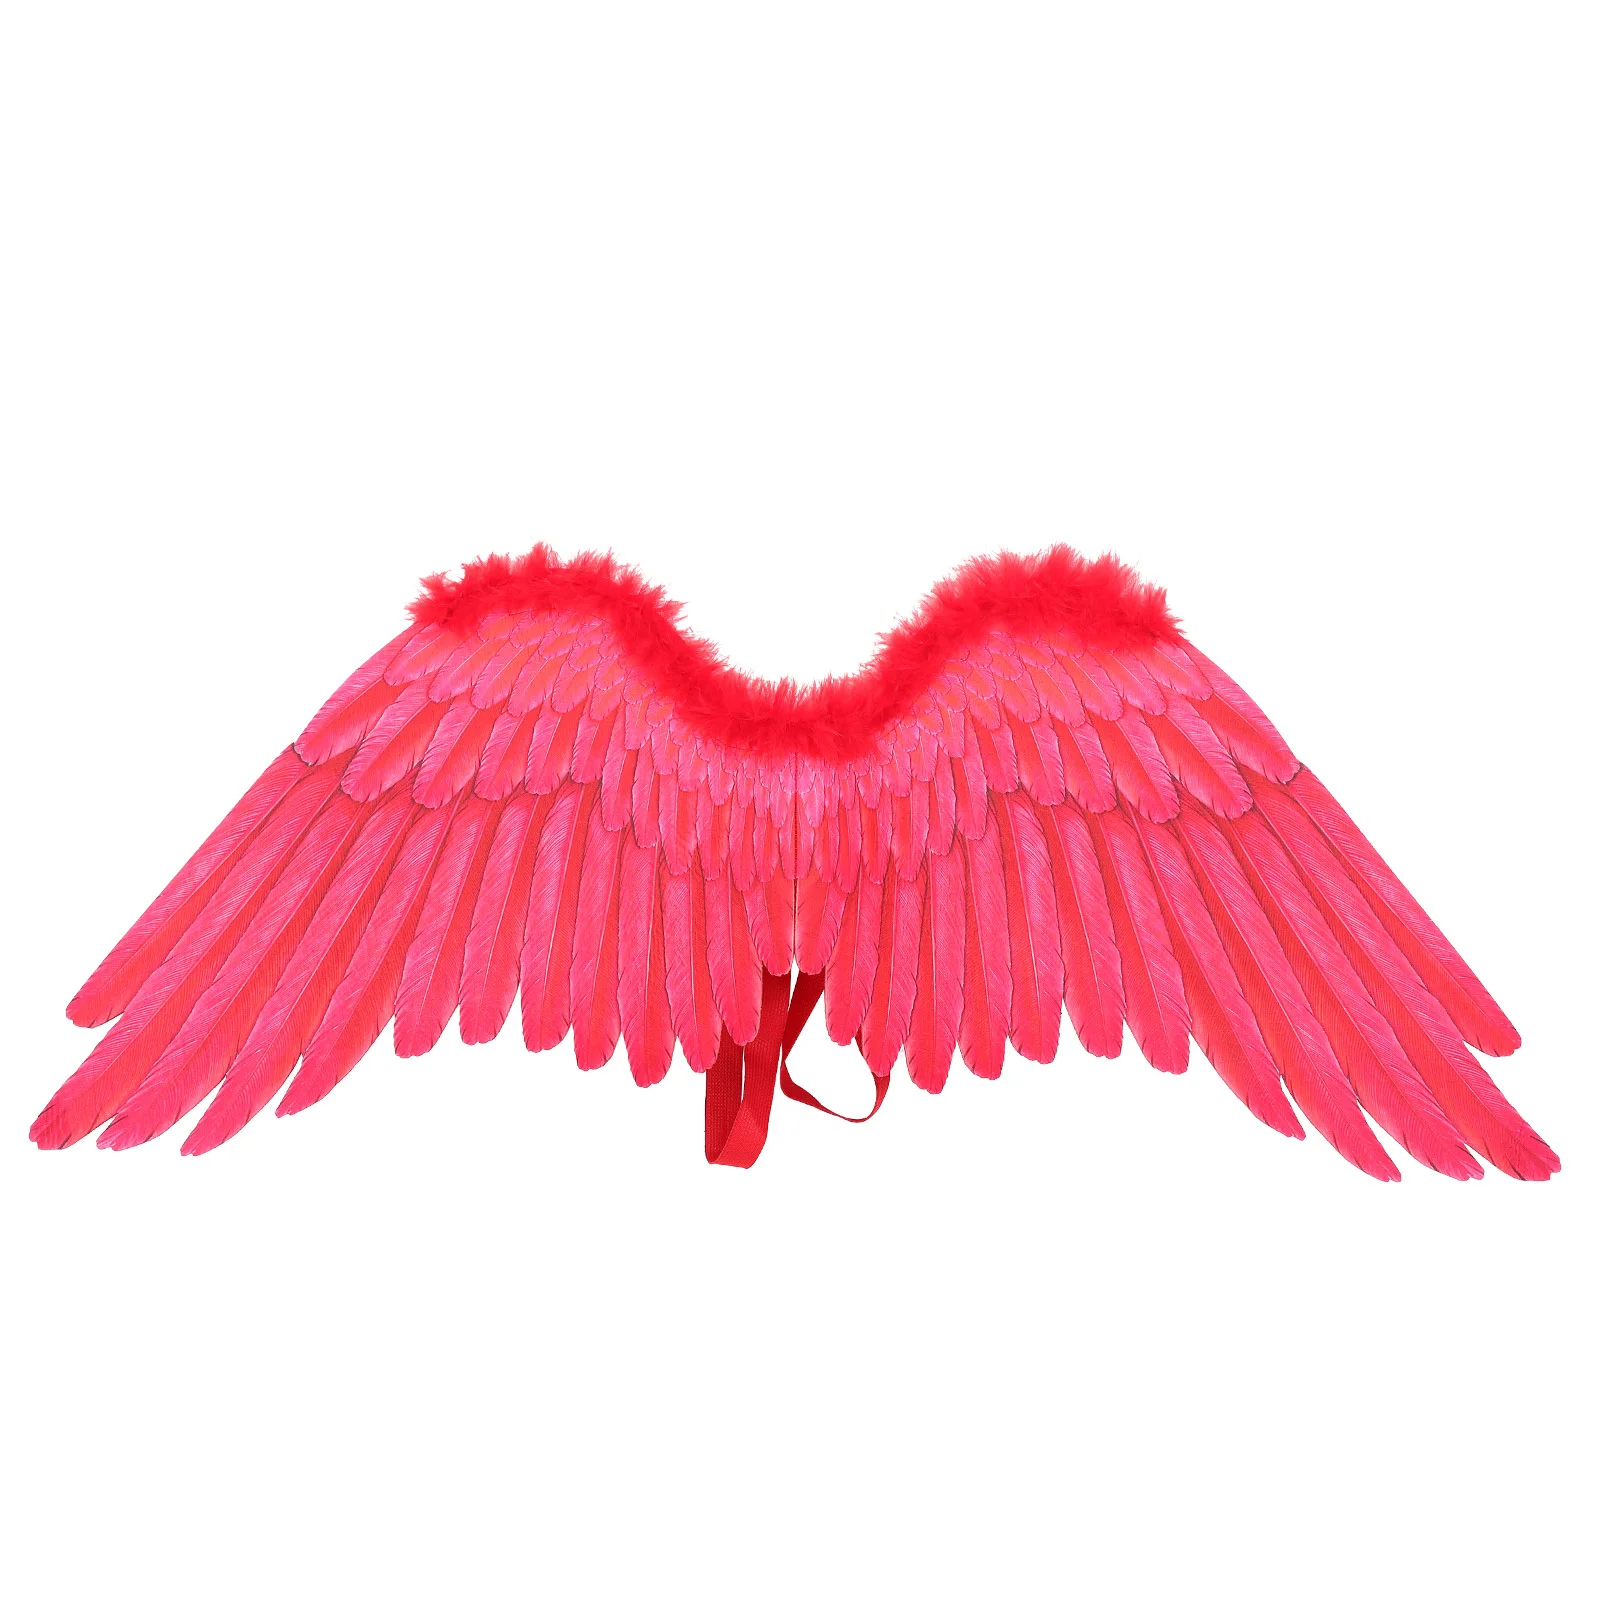 

Halloween Feather Angel Wings Costume White Feather For Kids Women Girls Cosplay Costumes Carnival Birthday Party Props